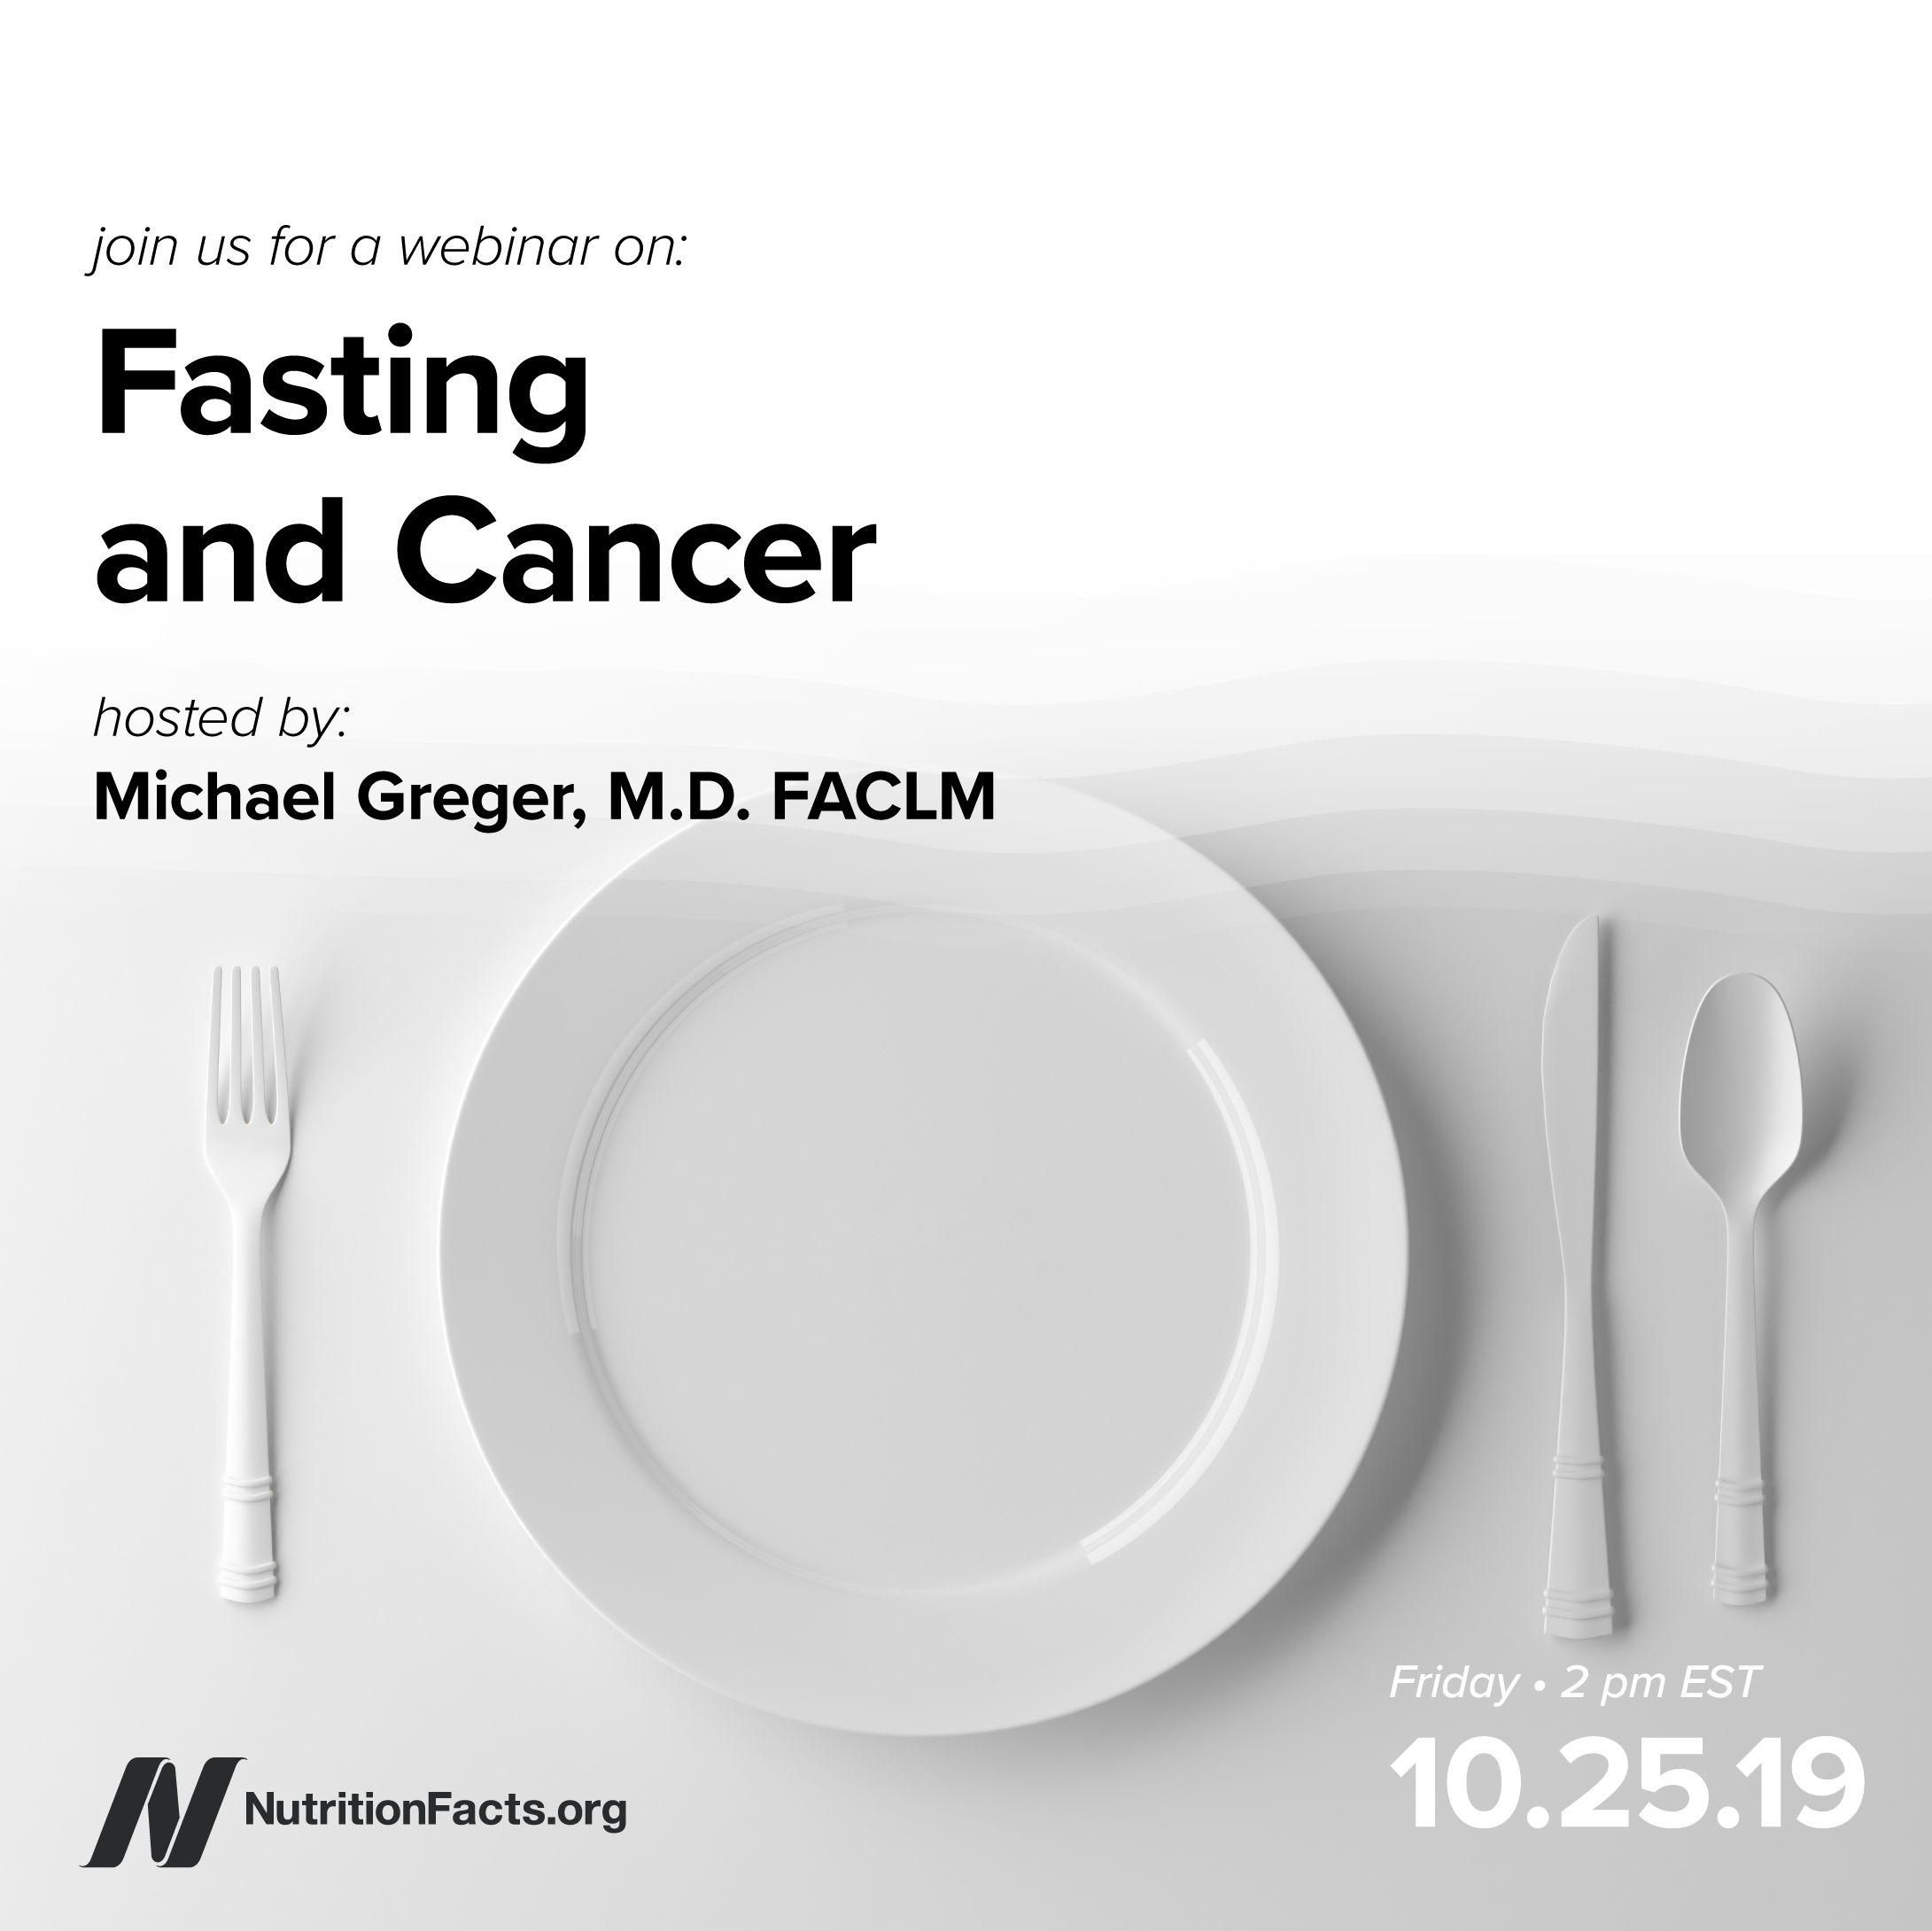 Fasting and Cancer